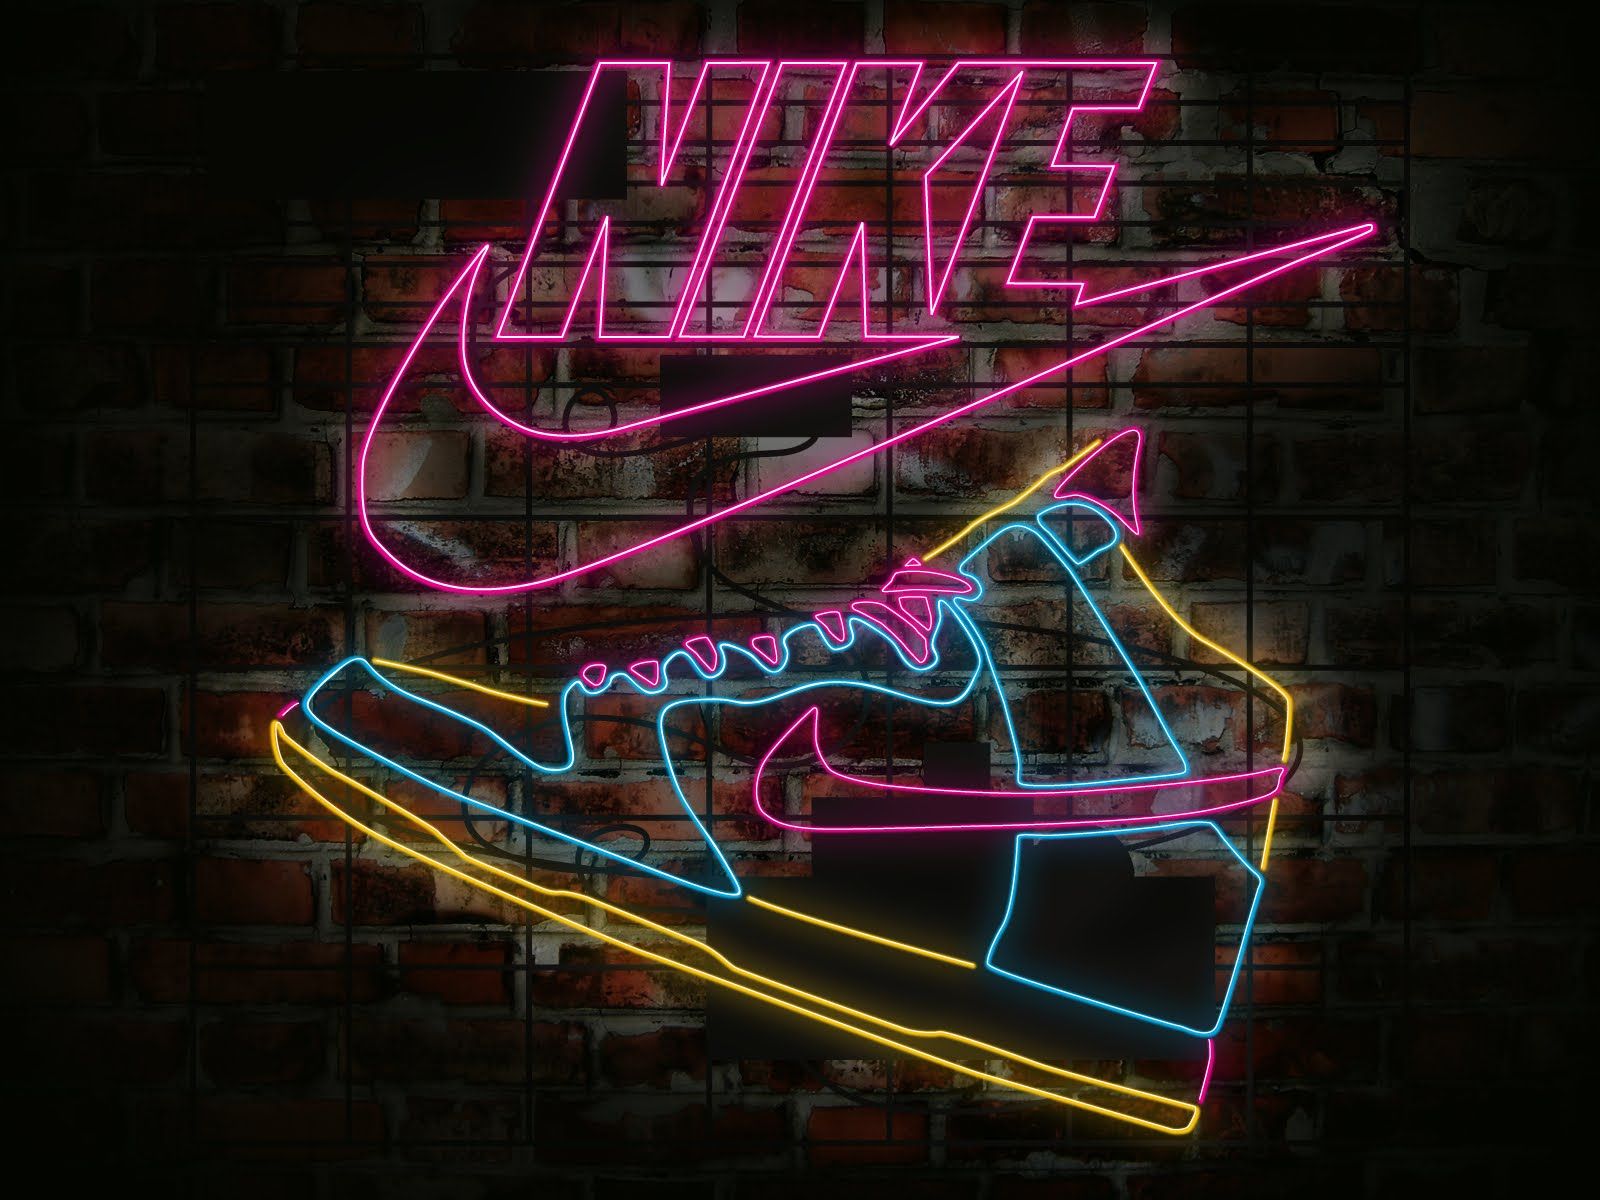 Some of the best shoes ever!. Neon signs, Wallpaper iphone neon, Neon wall art